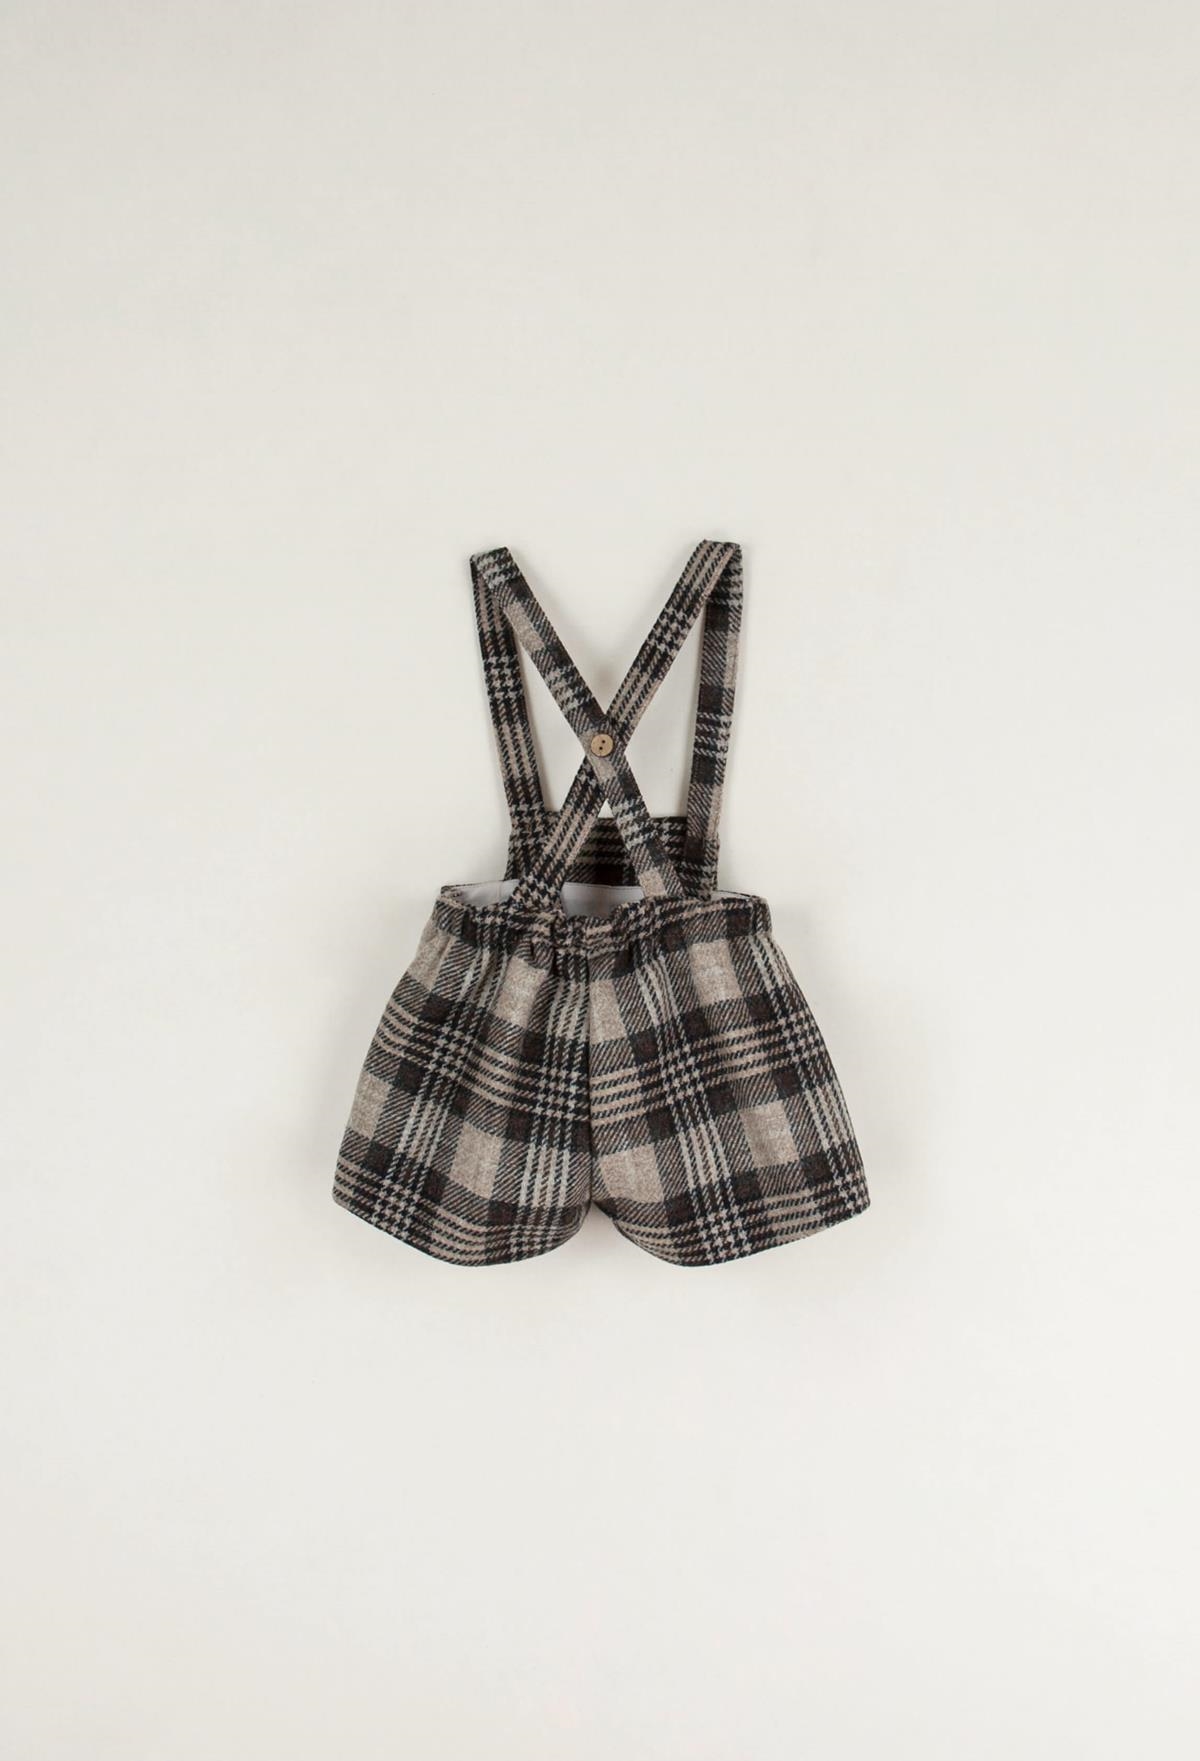 Mod.6.4 Brown plaid dungarees with crossover straps | AW22.23 Mod.6.4 Brown plaid dungarees with crossover straps